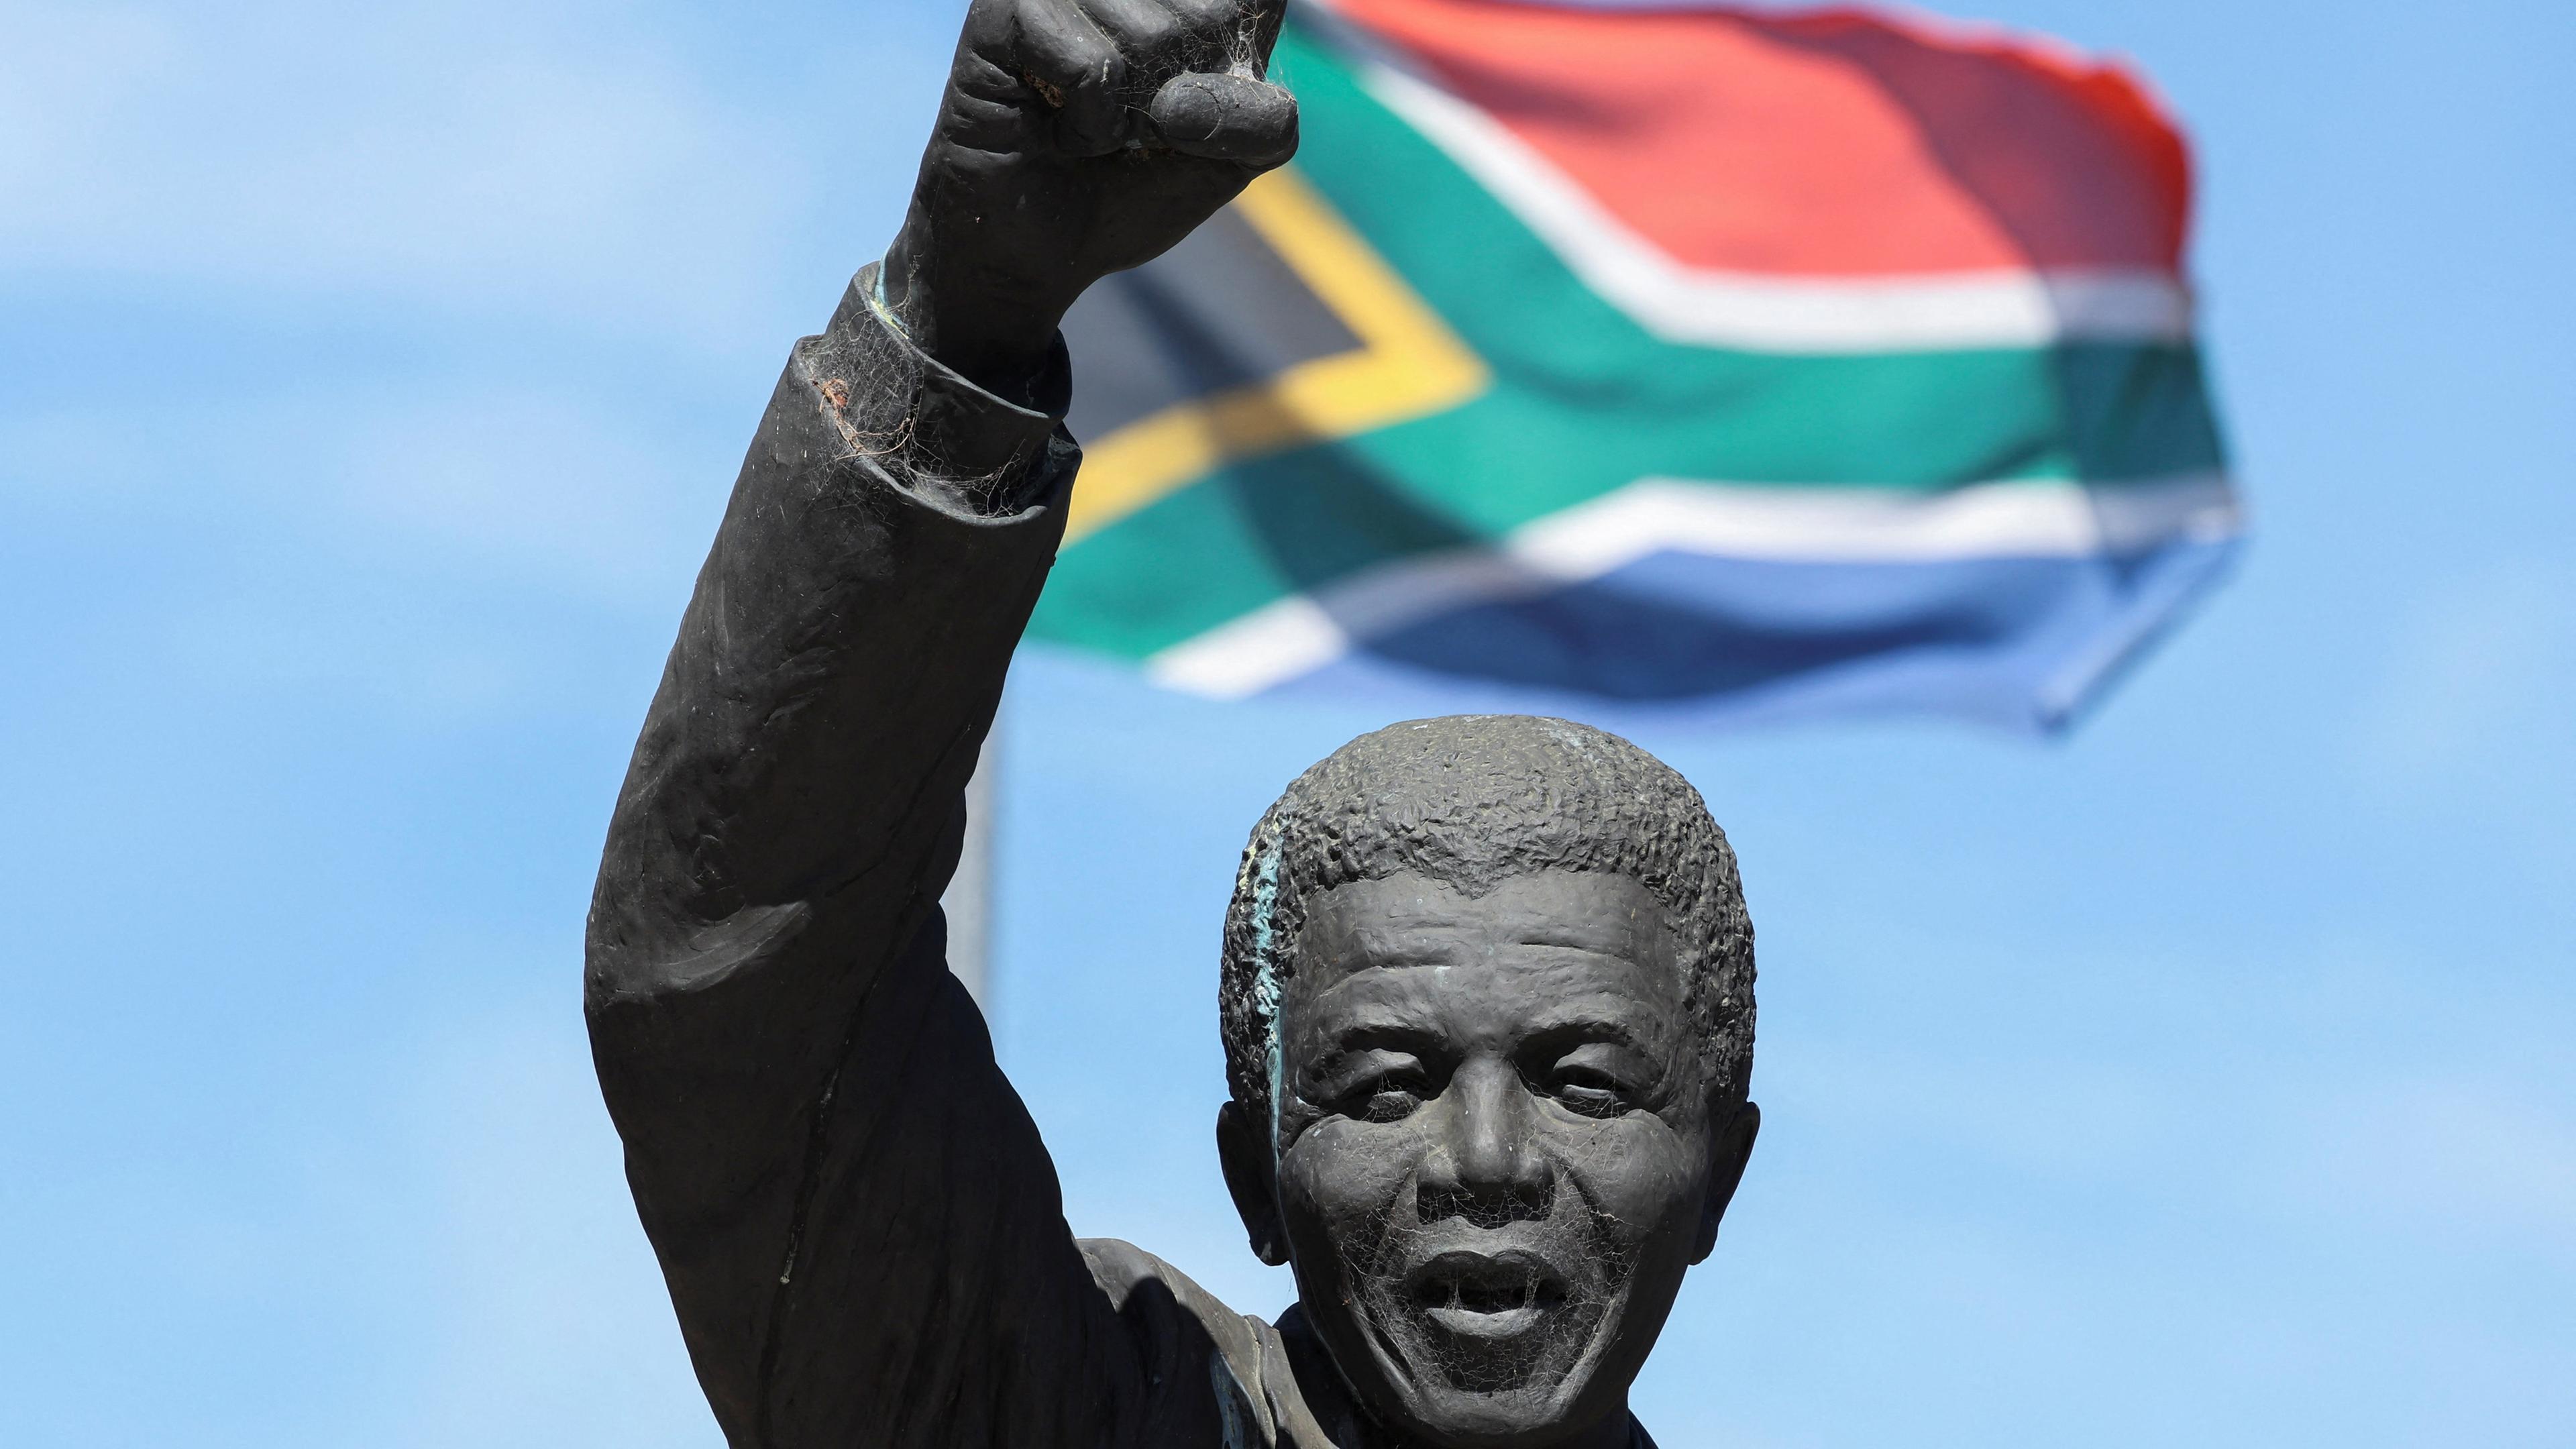 The 10th anniversary of former South African President Nelson Mandela's death